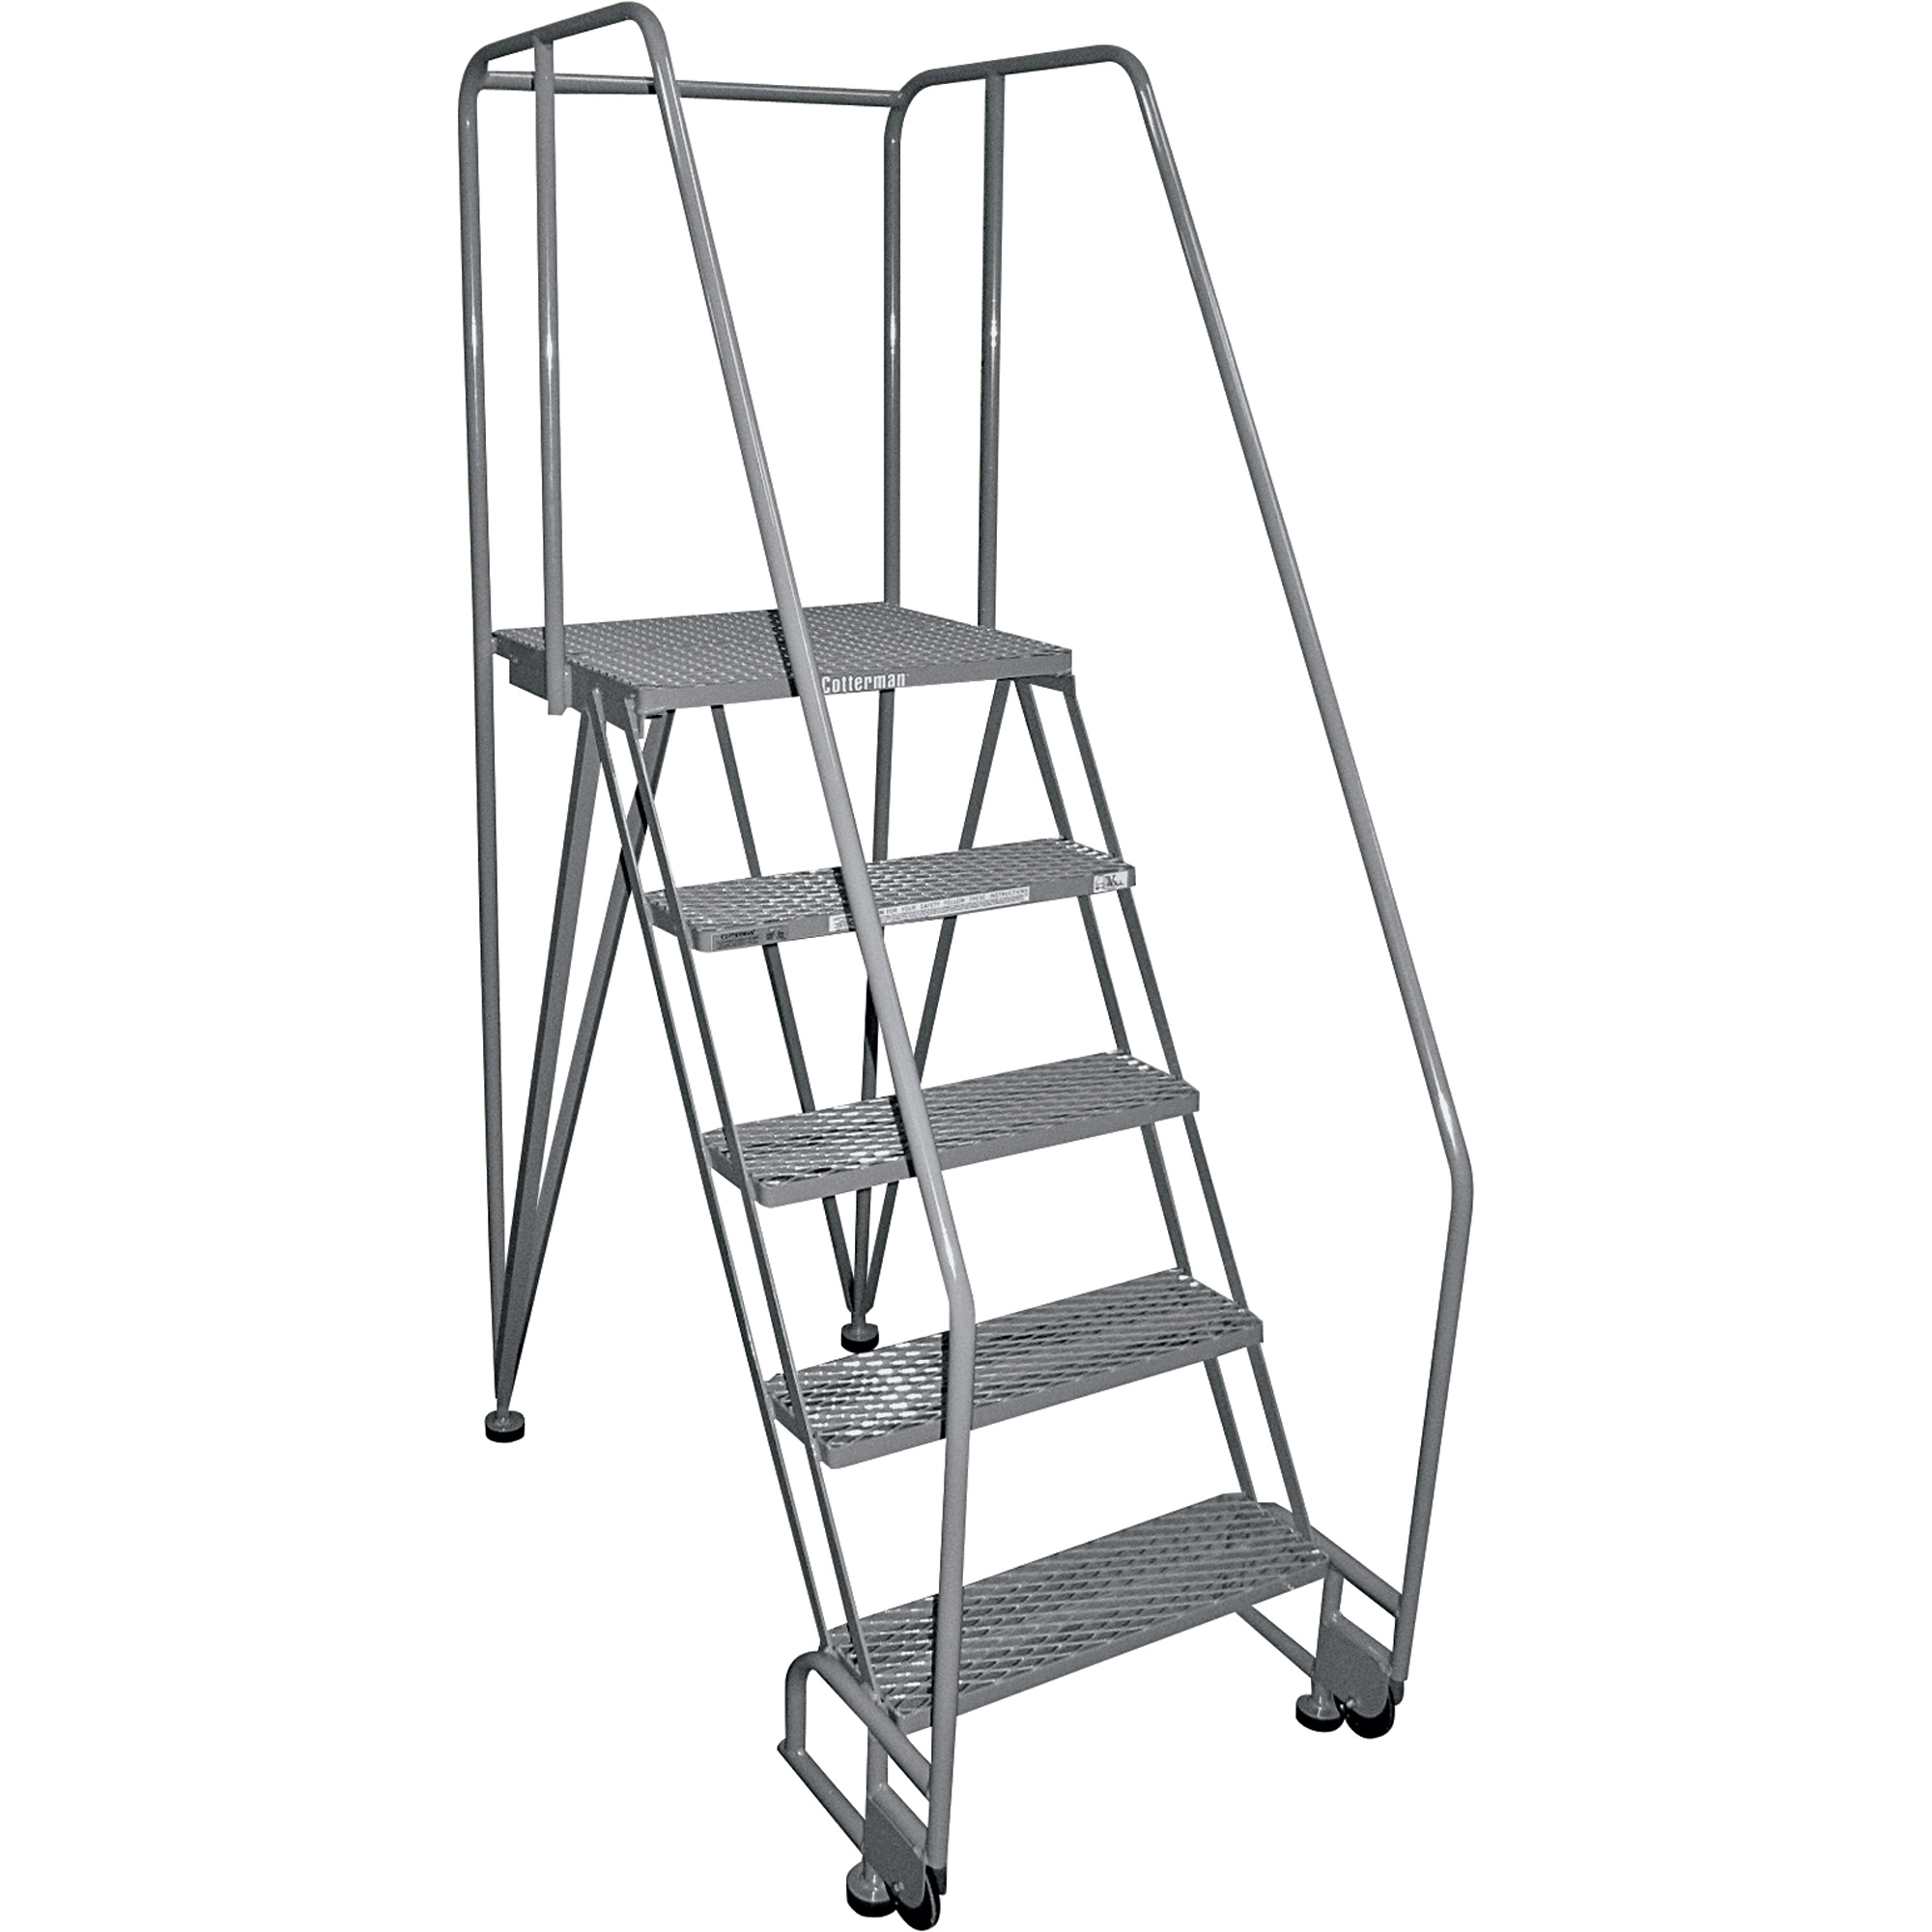 Step Ladder Ladders Bmm Gif Clipart   Free Clip Art Images